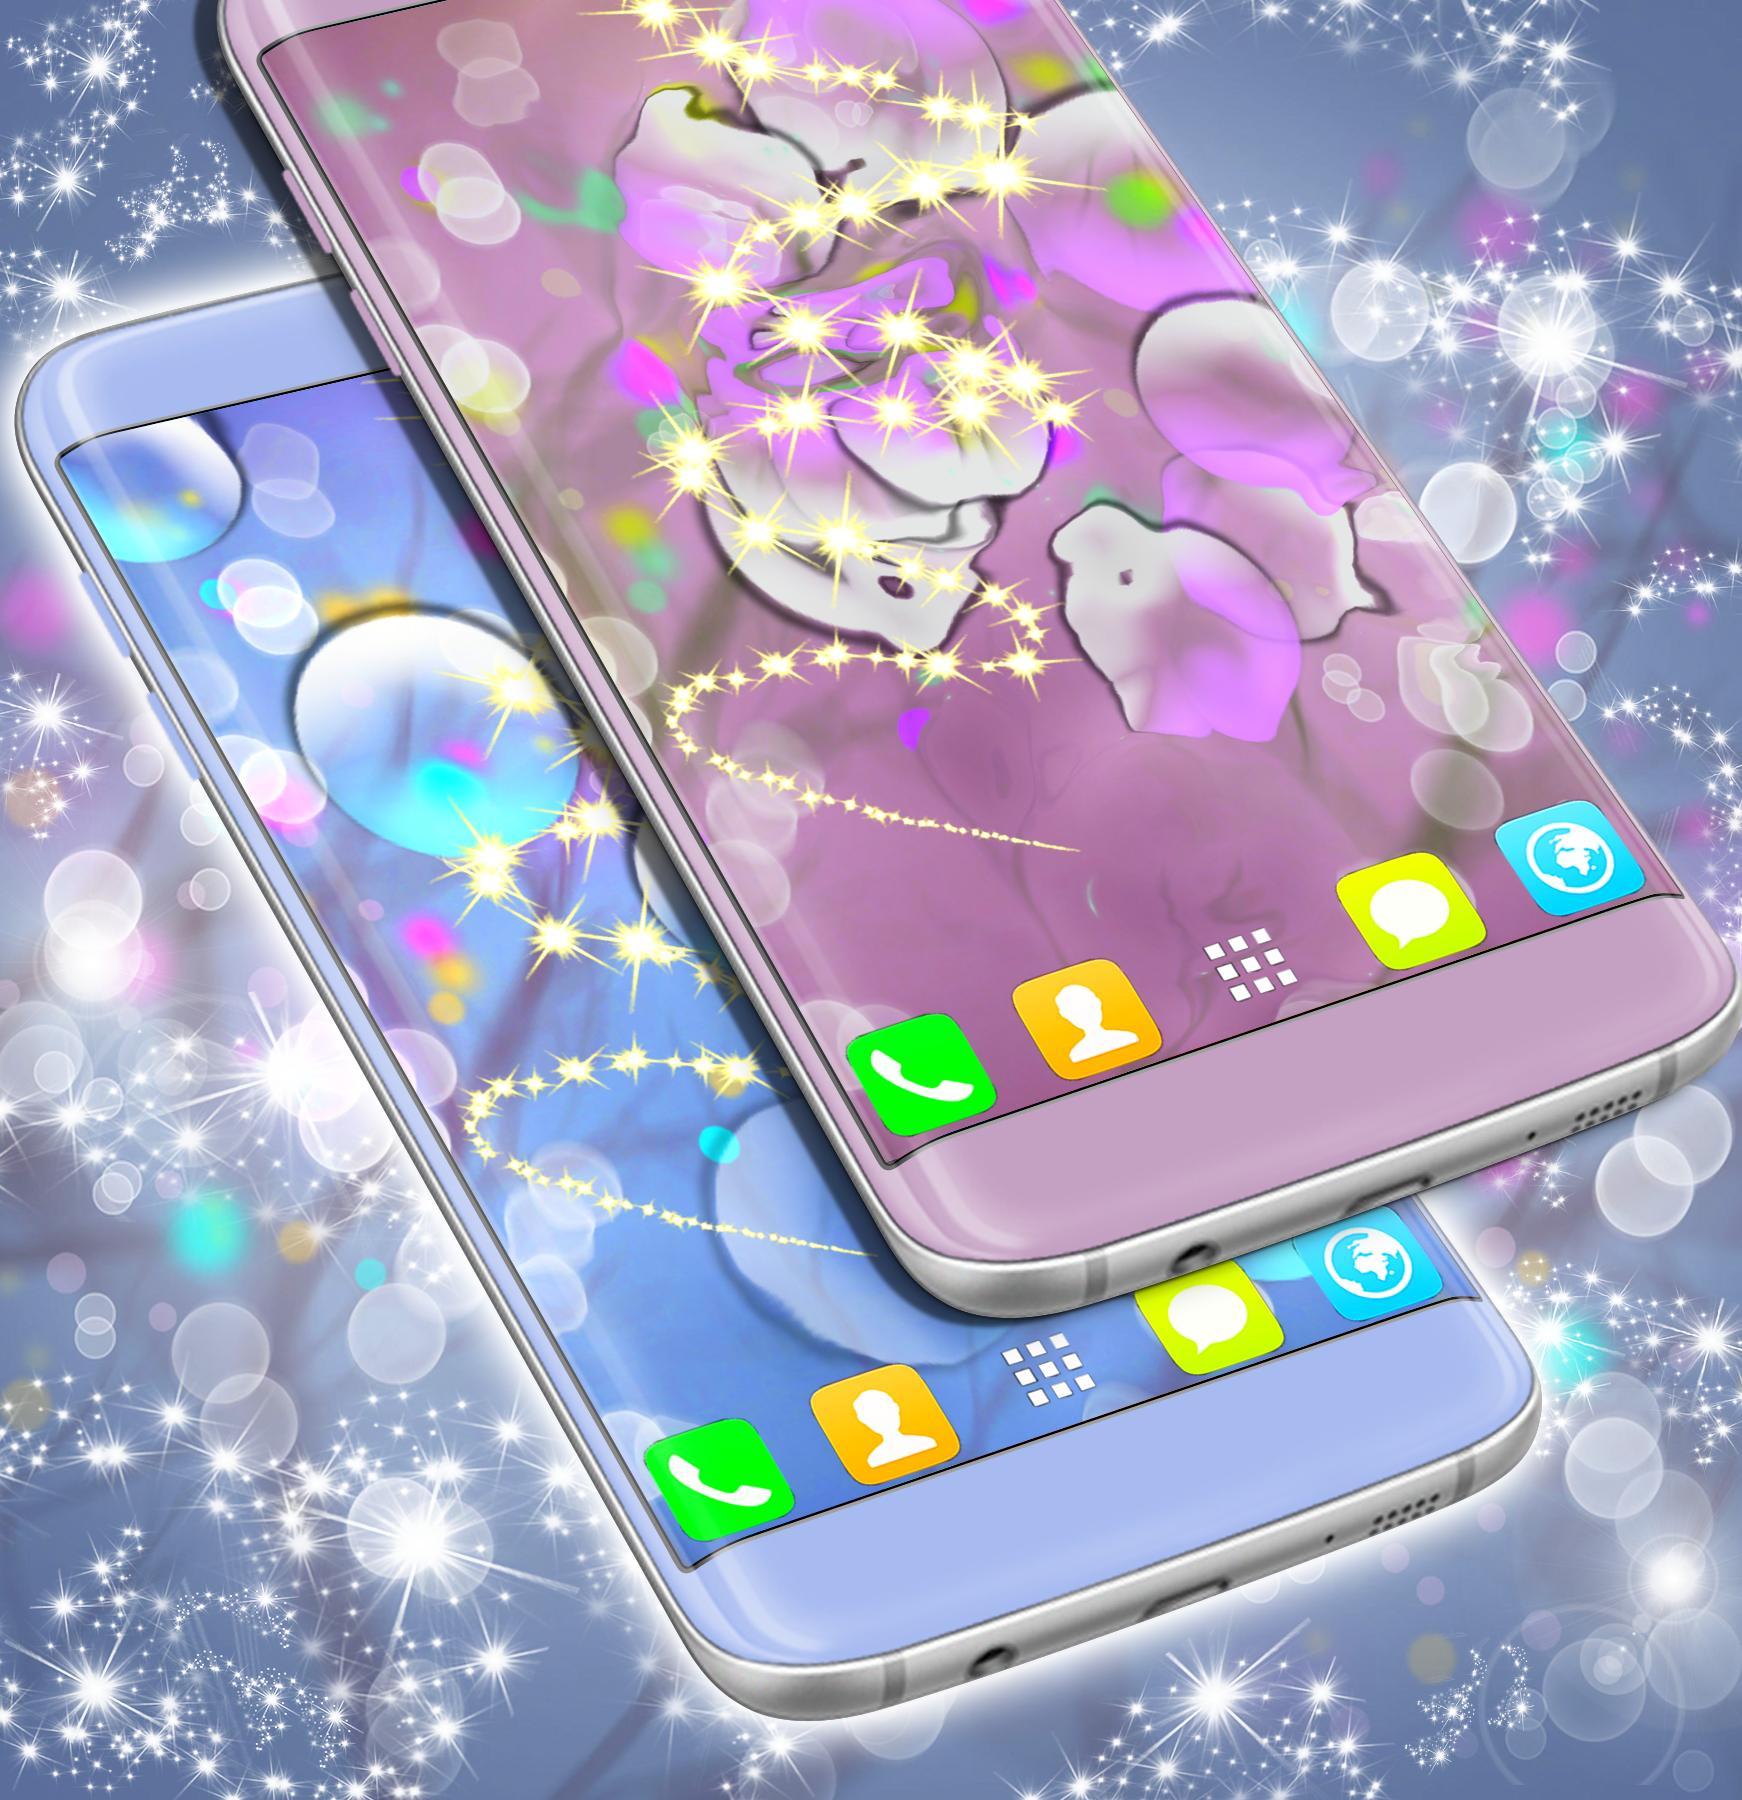 Live Wallpapers For Samsung Galaxy S6 Edge For Android Apk Download